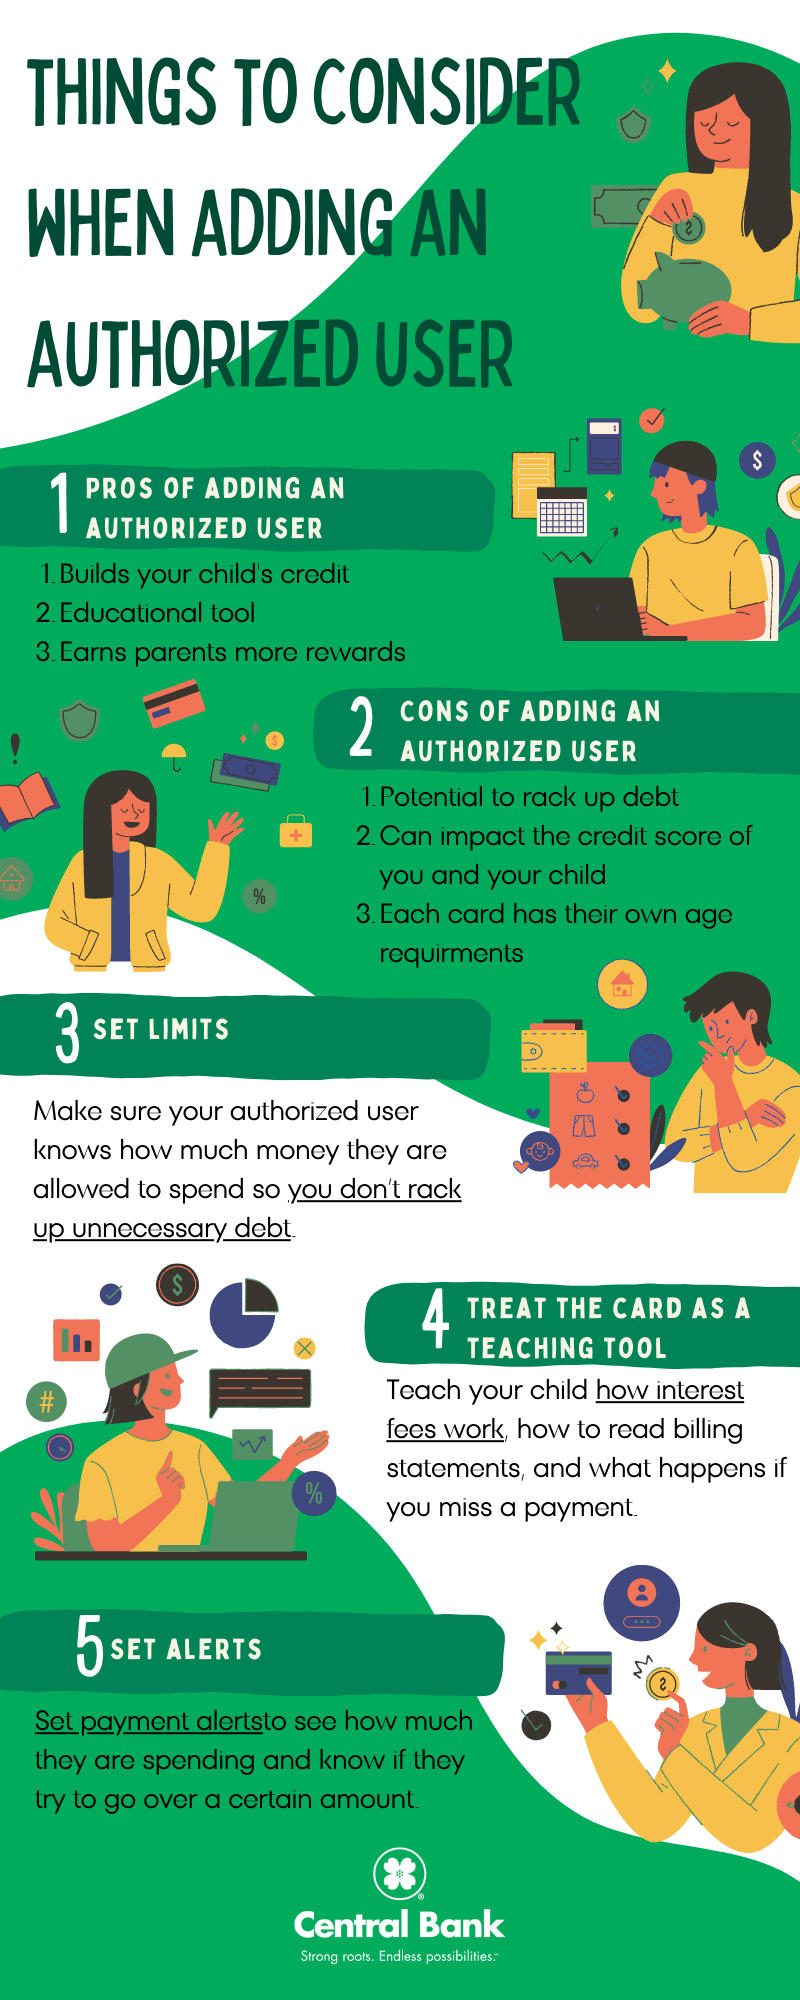 Things to Consider when Adding an Authorized User Infographic